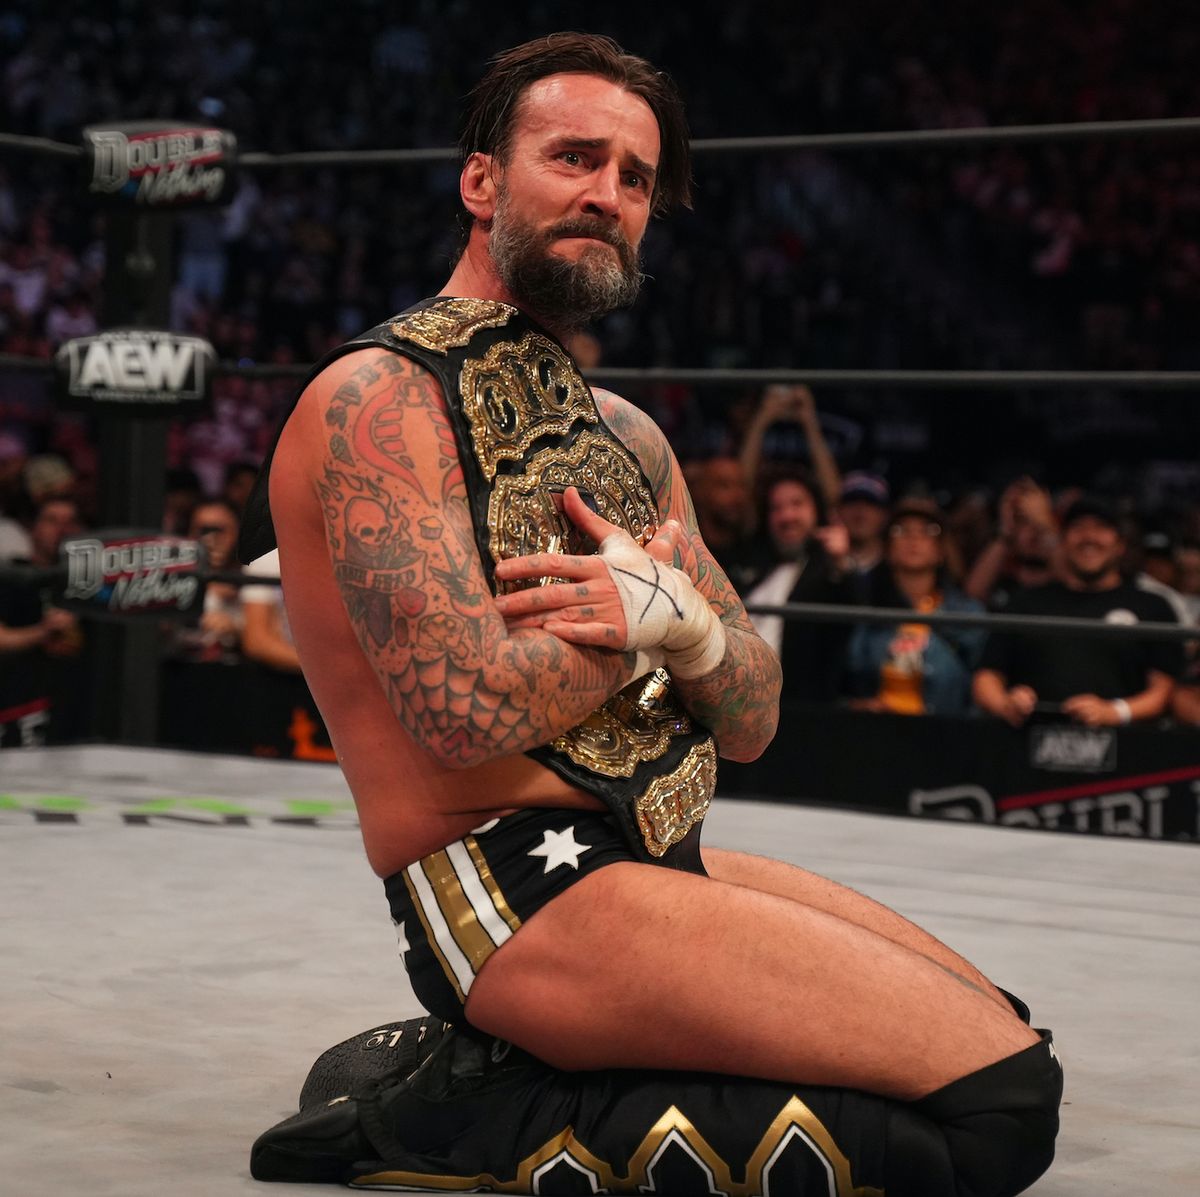 Should CM Punk return to the WWE? Have your say